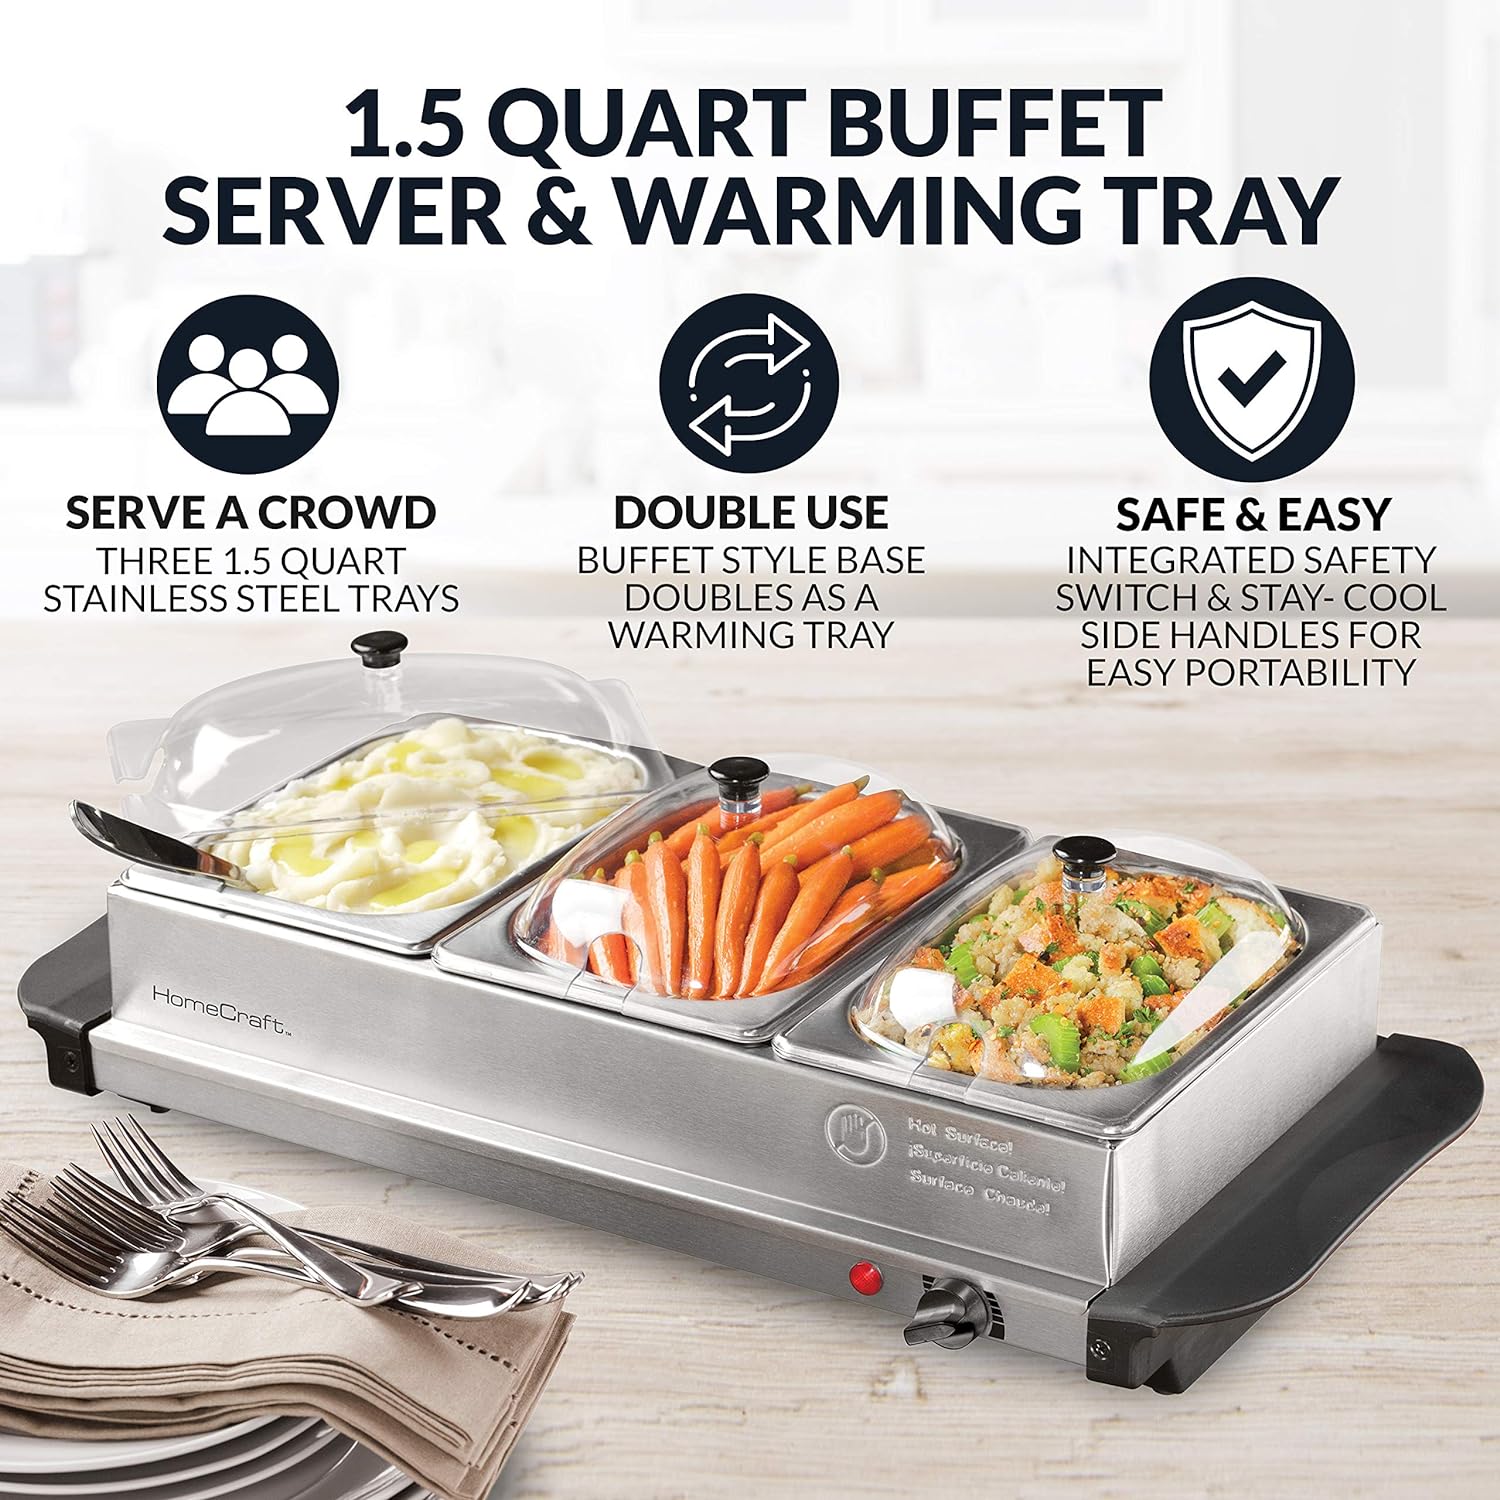 HomeCraft HCBS15SS 3-Station 1.5-Quart Stainless Steel Buffet Server Slow Cooker  Warming Tray, Adjustable Temperature, Perfect for Dinner, Appetizers